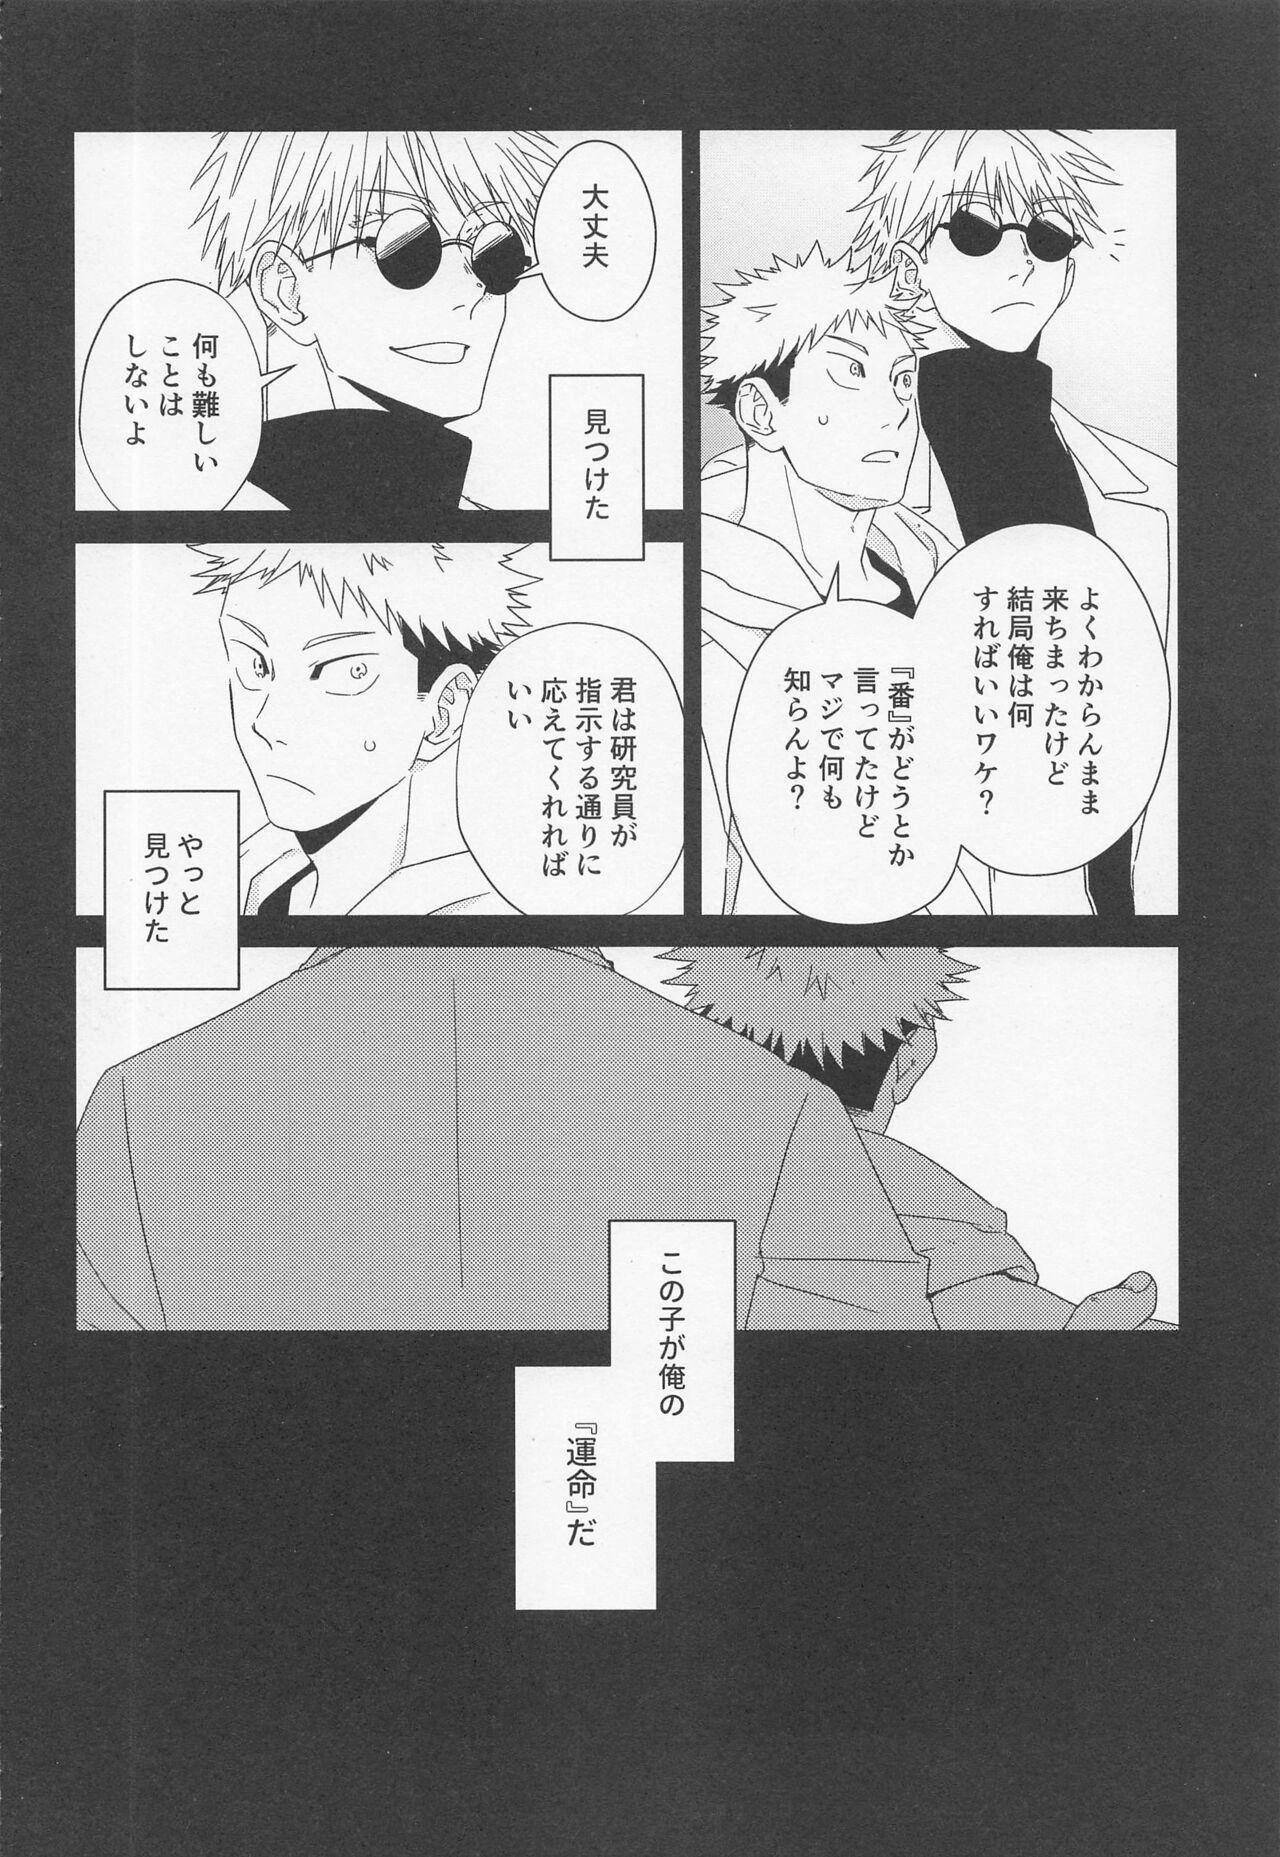 Old Young Fiction/Non-Fiction - Jujutsu kaisen Fucked - Page 7